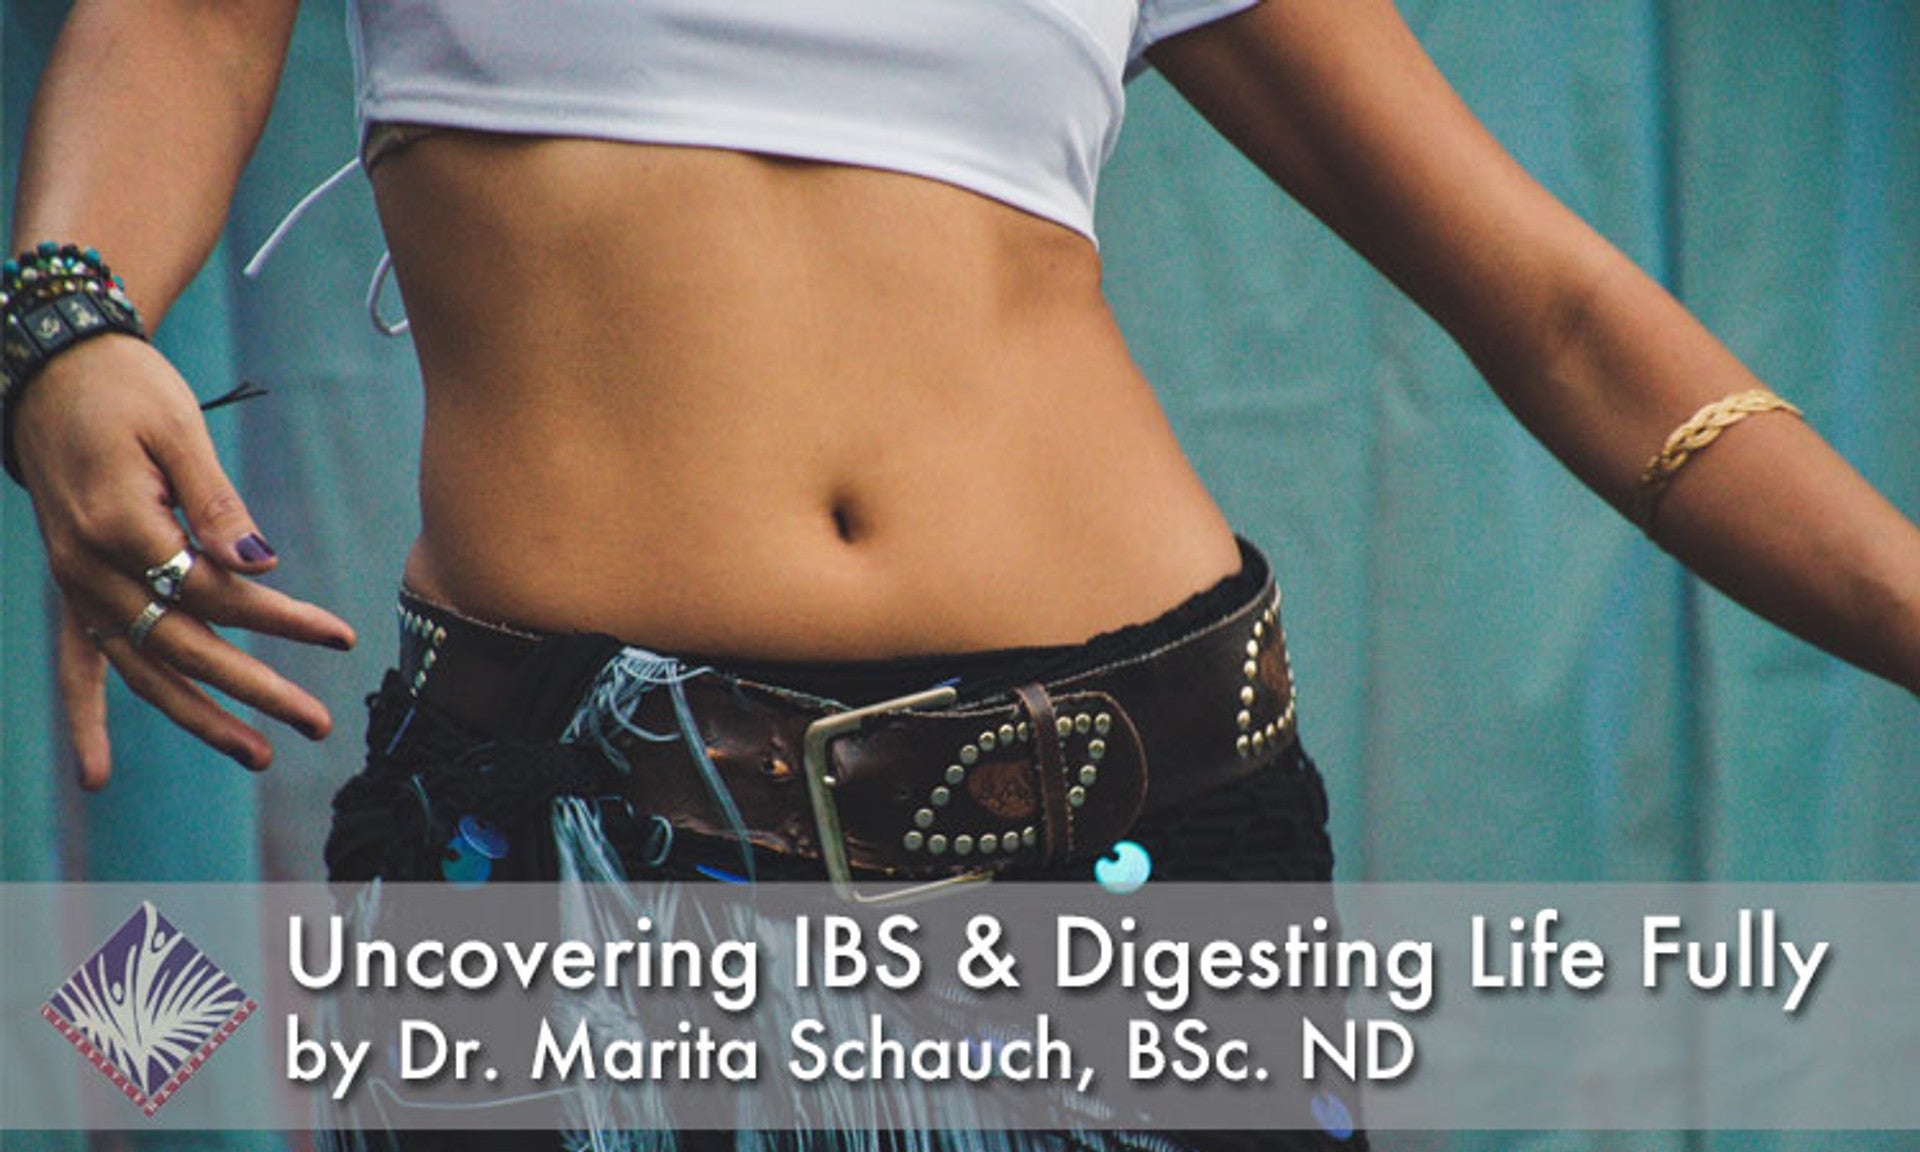 Uncovering IBS and Digesting Life Fully